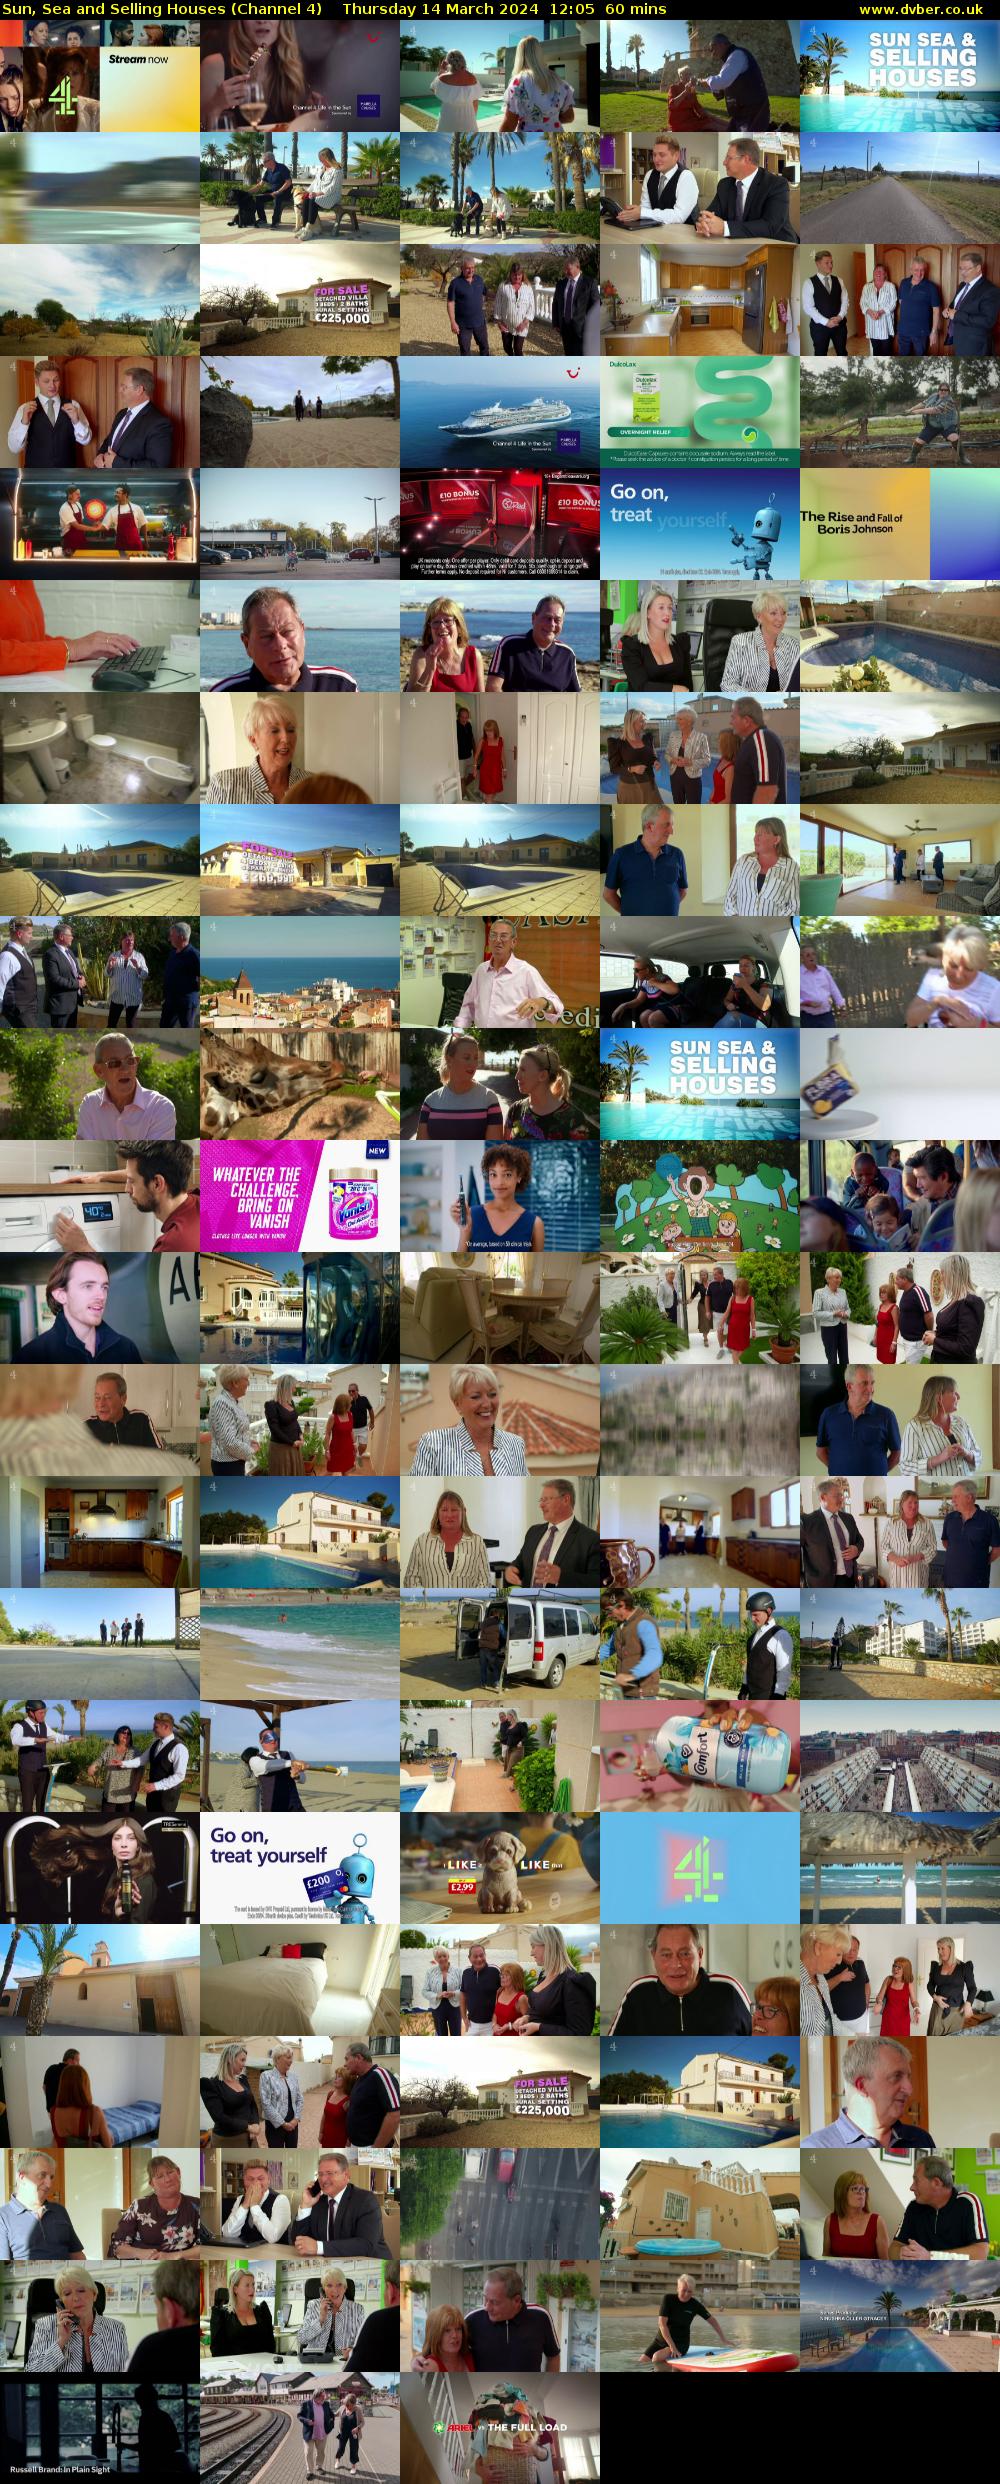 Sun, Sea and Selling Houses (Channel 4) Thursday 14 March 2024 12:05 - 13:05